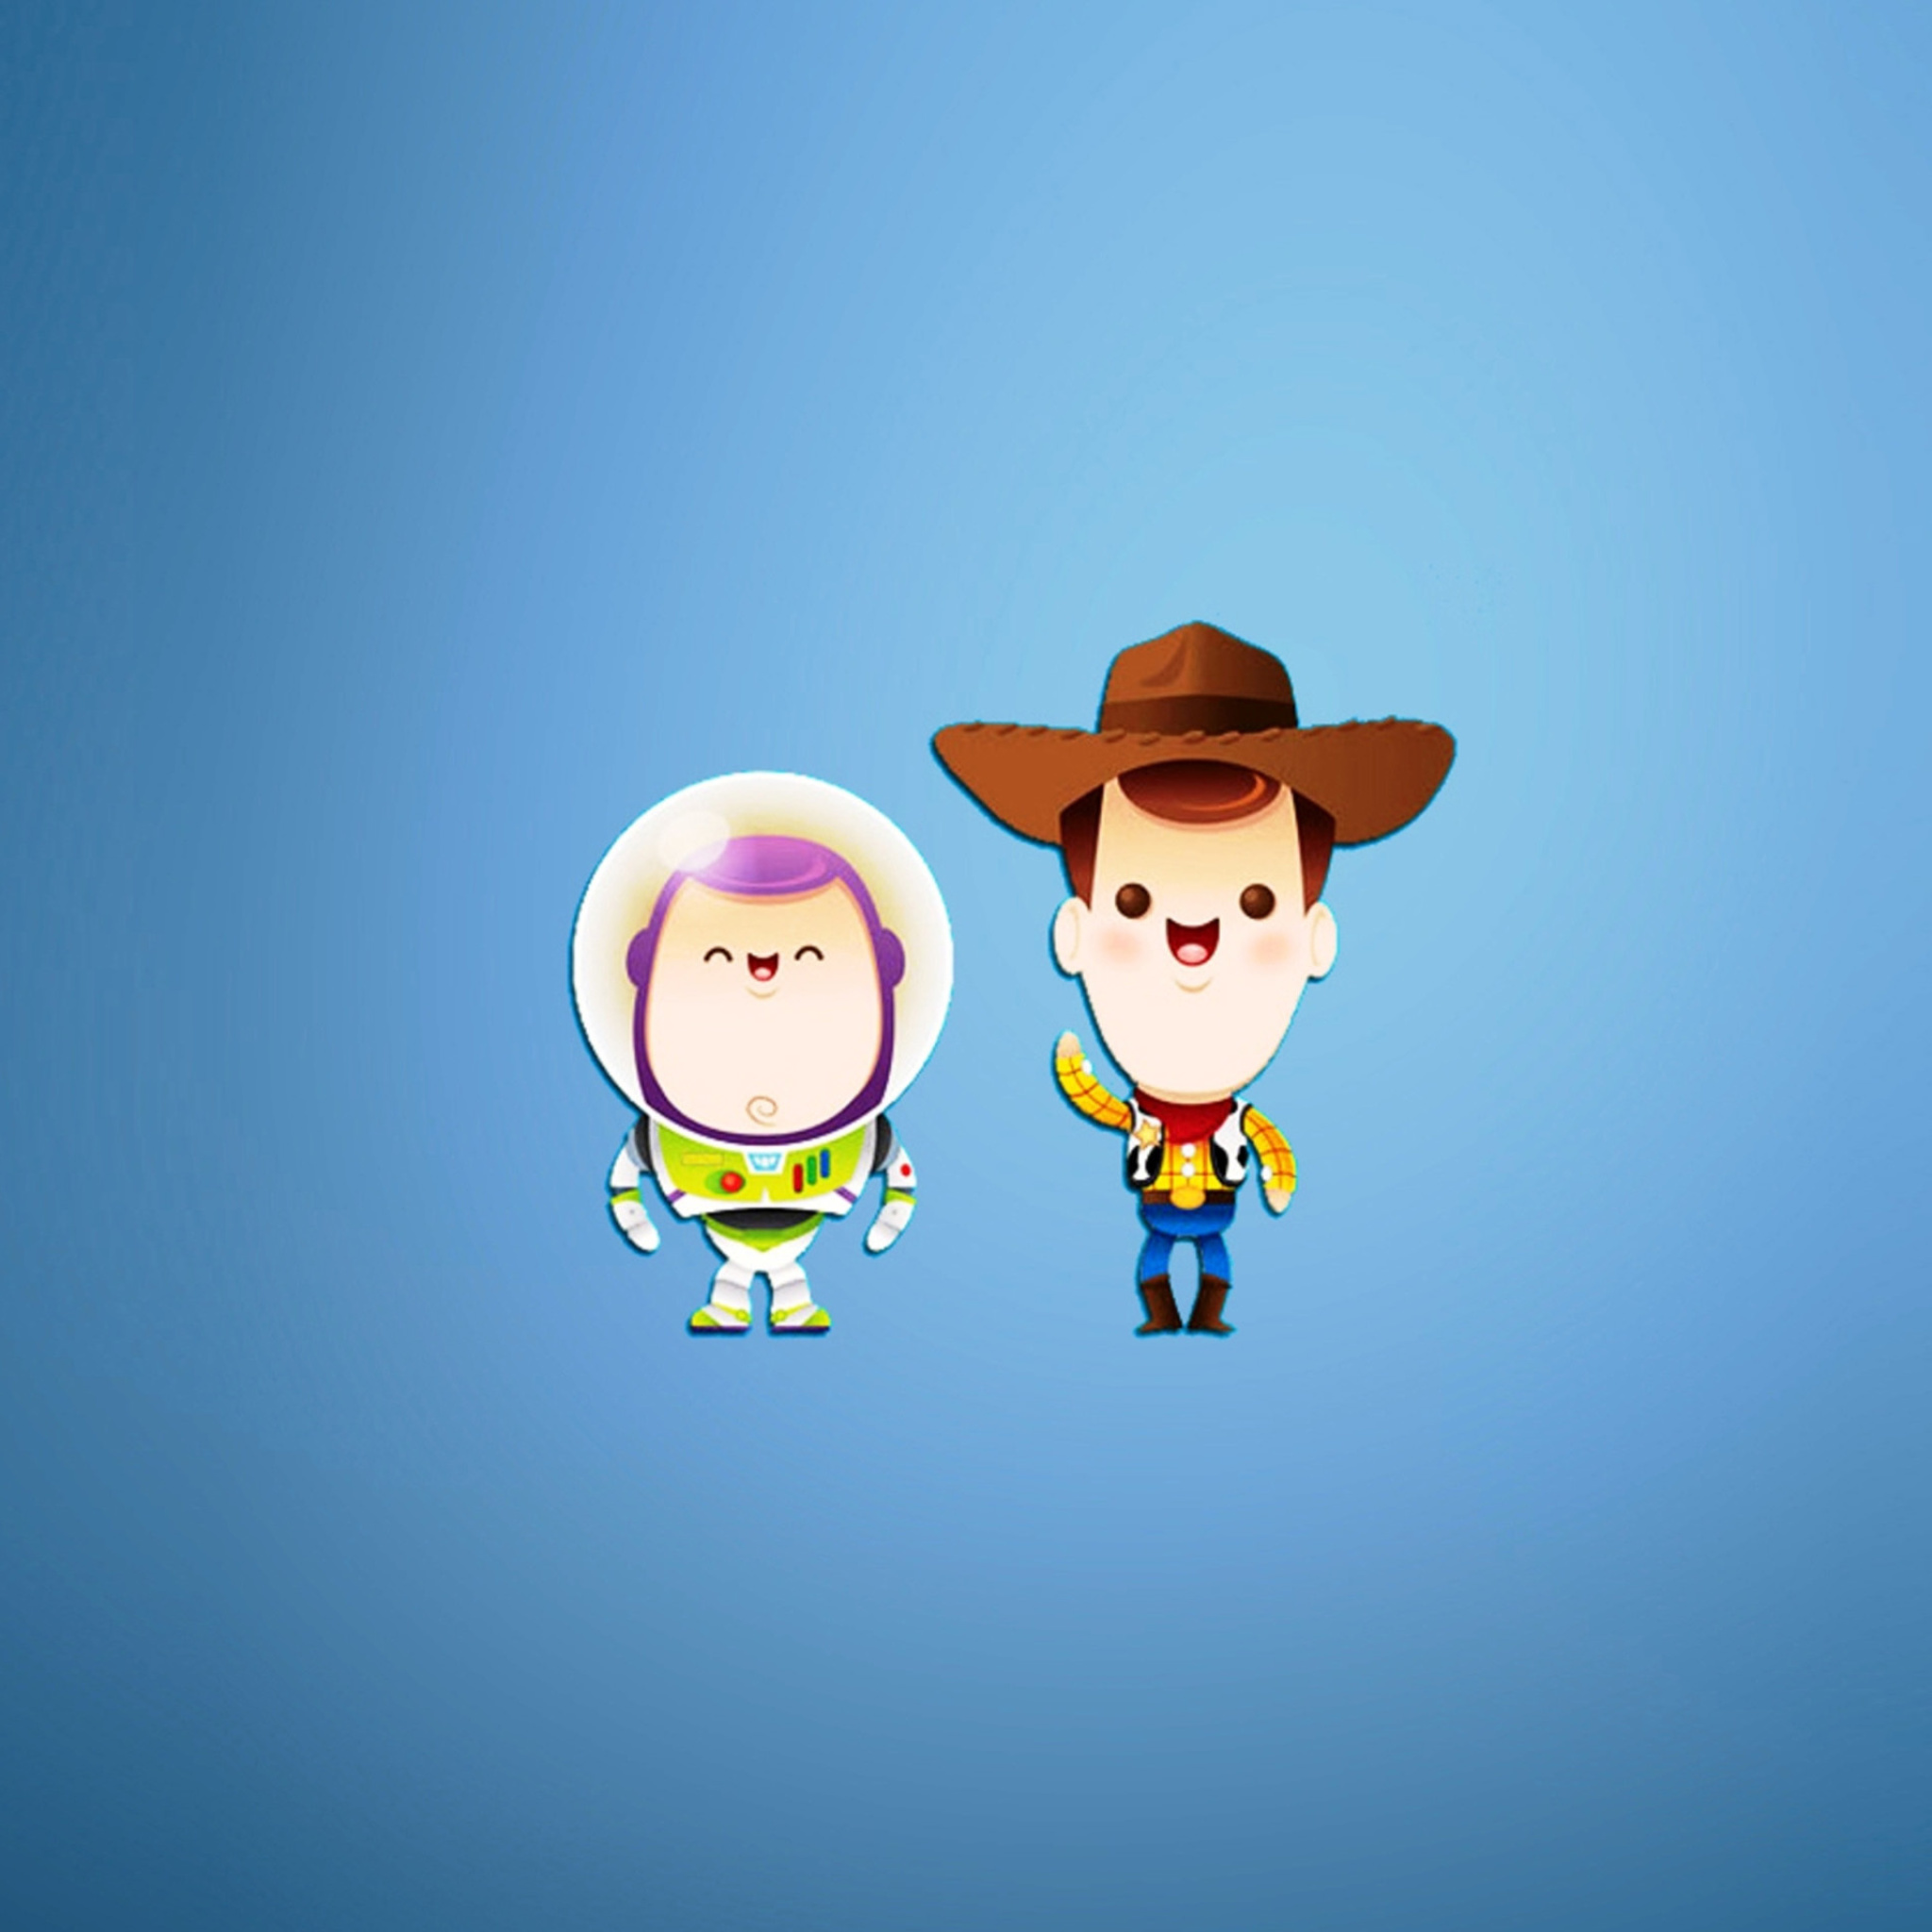 Buzz and Woody in Toy Story wallpaper 2048x2048